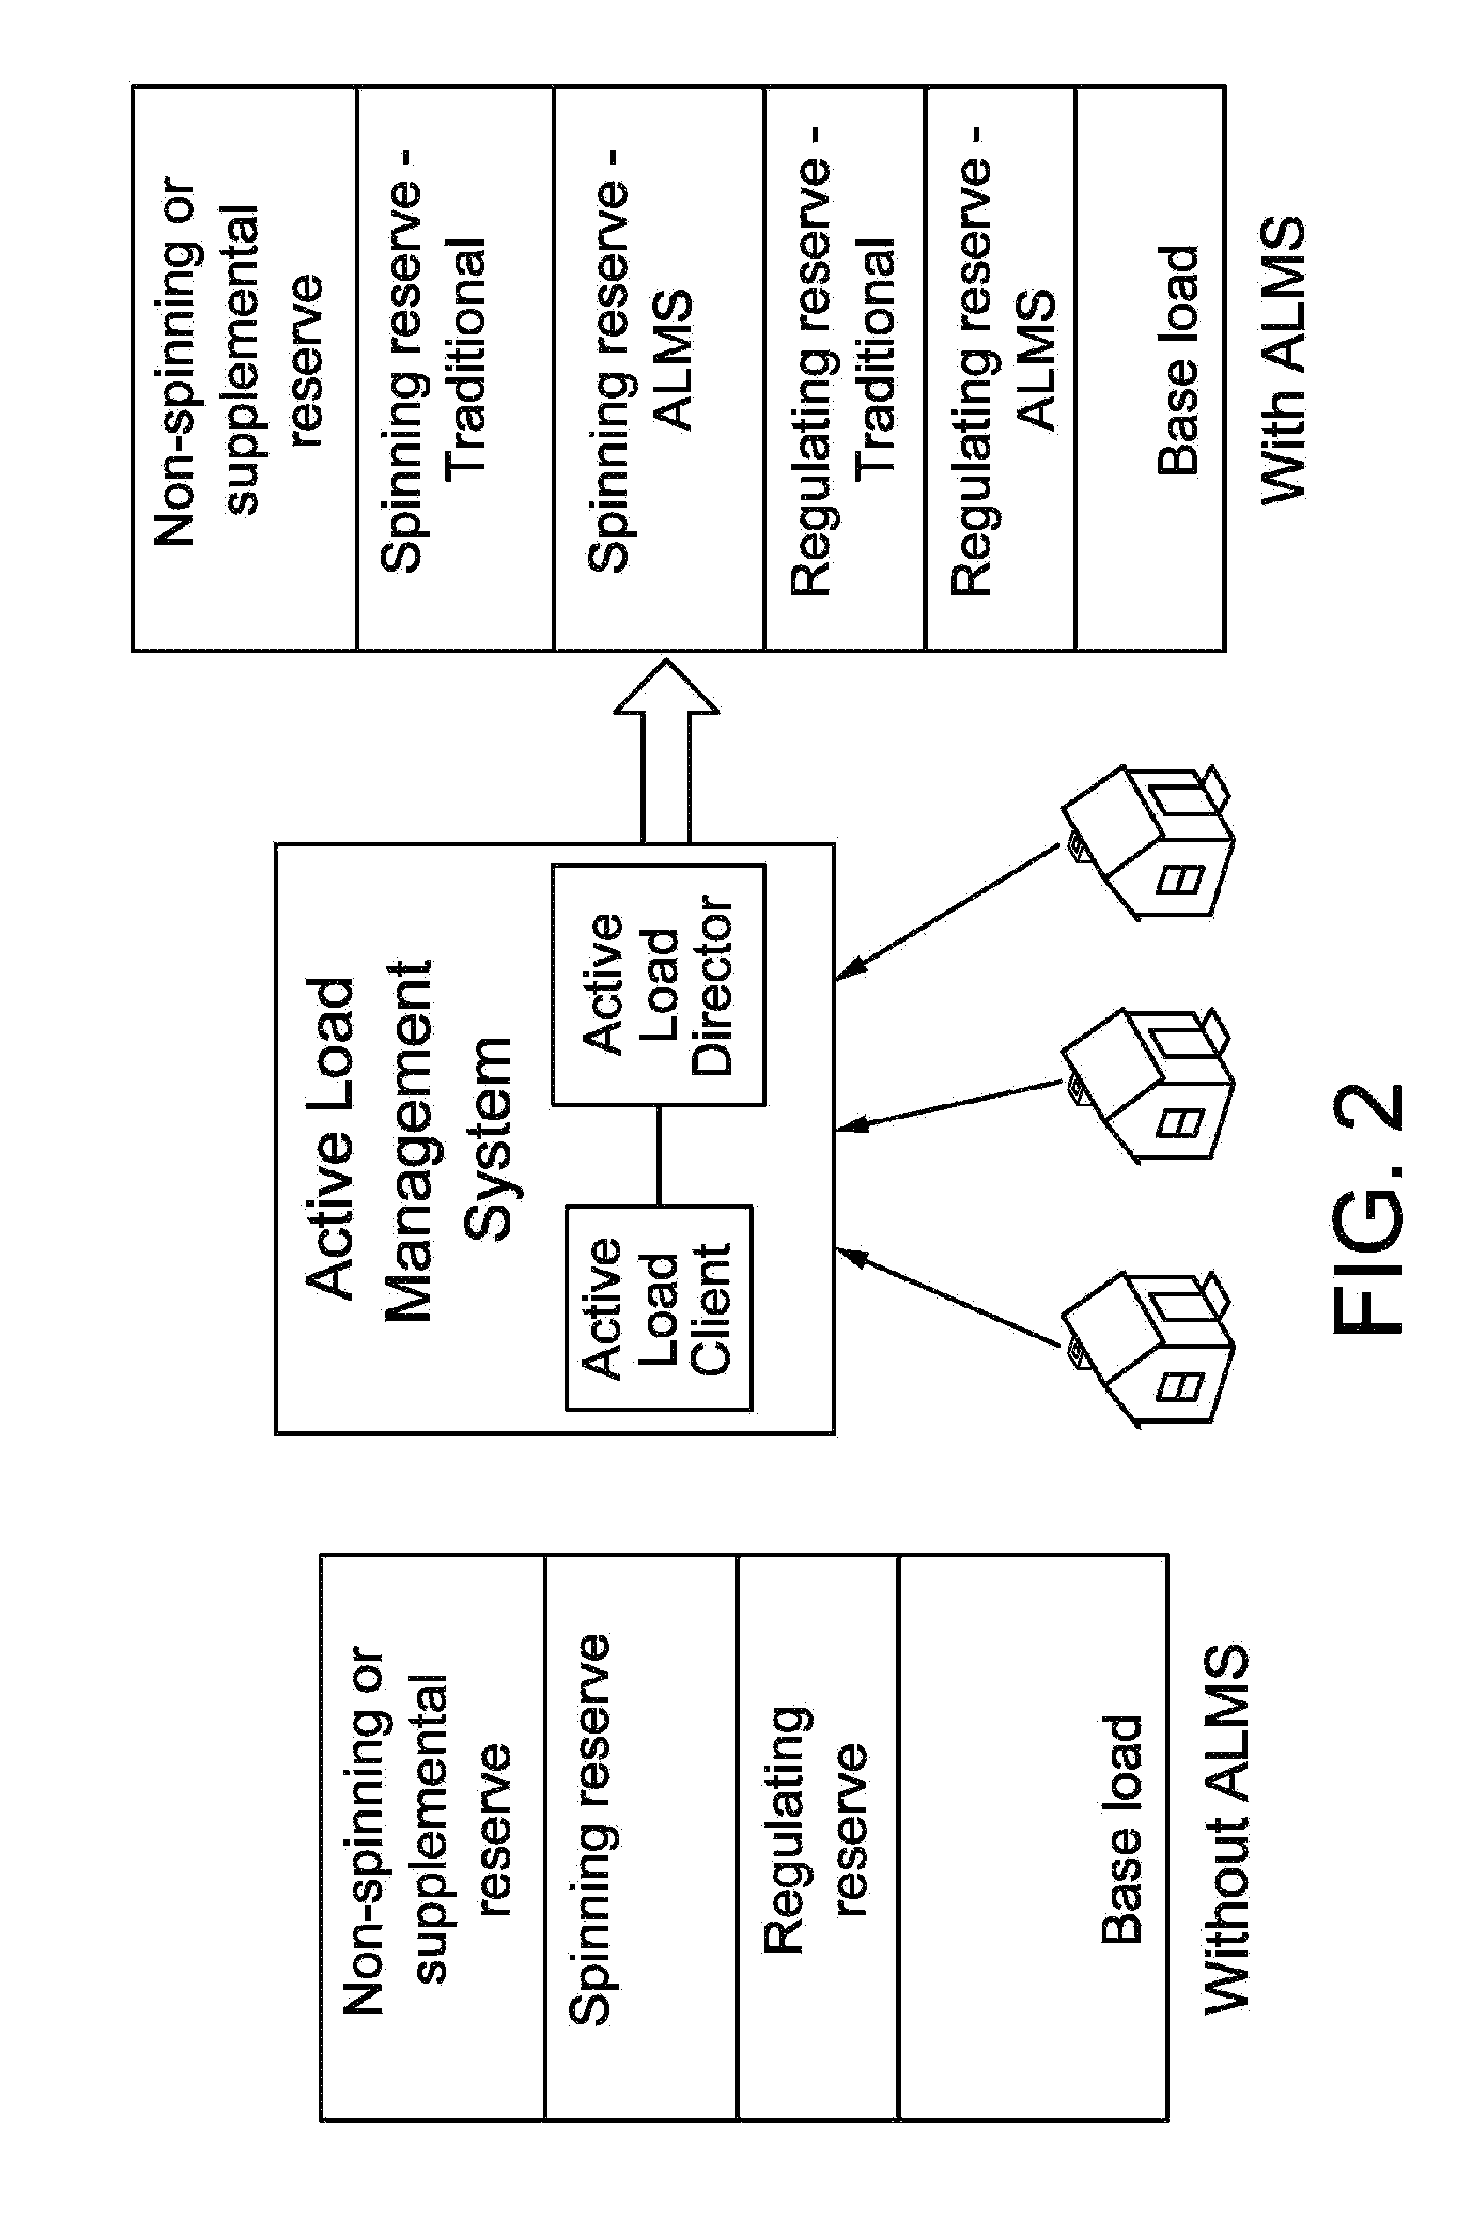 System and method for generating and providing dispatchable operating reserve energy capacity through use of active load management